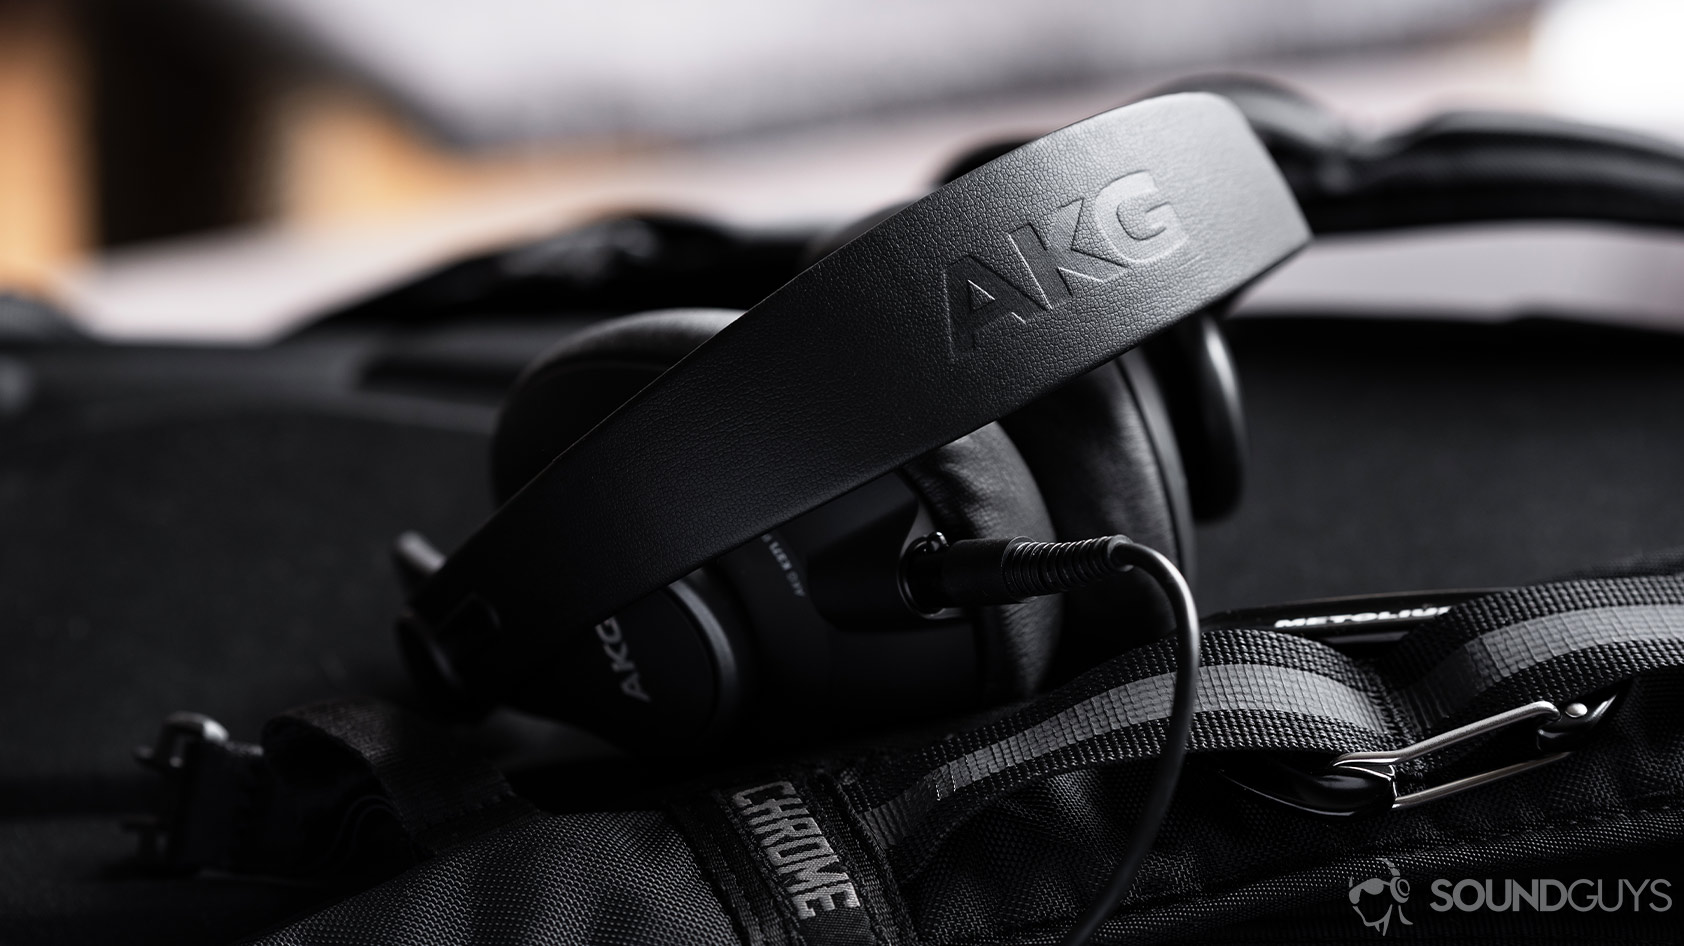 A picture of the AKG K371 wired over-ear headphones with the AKG headband in focus.